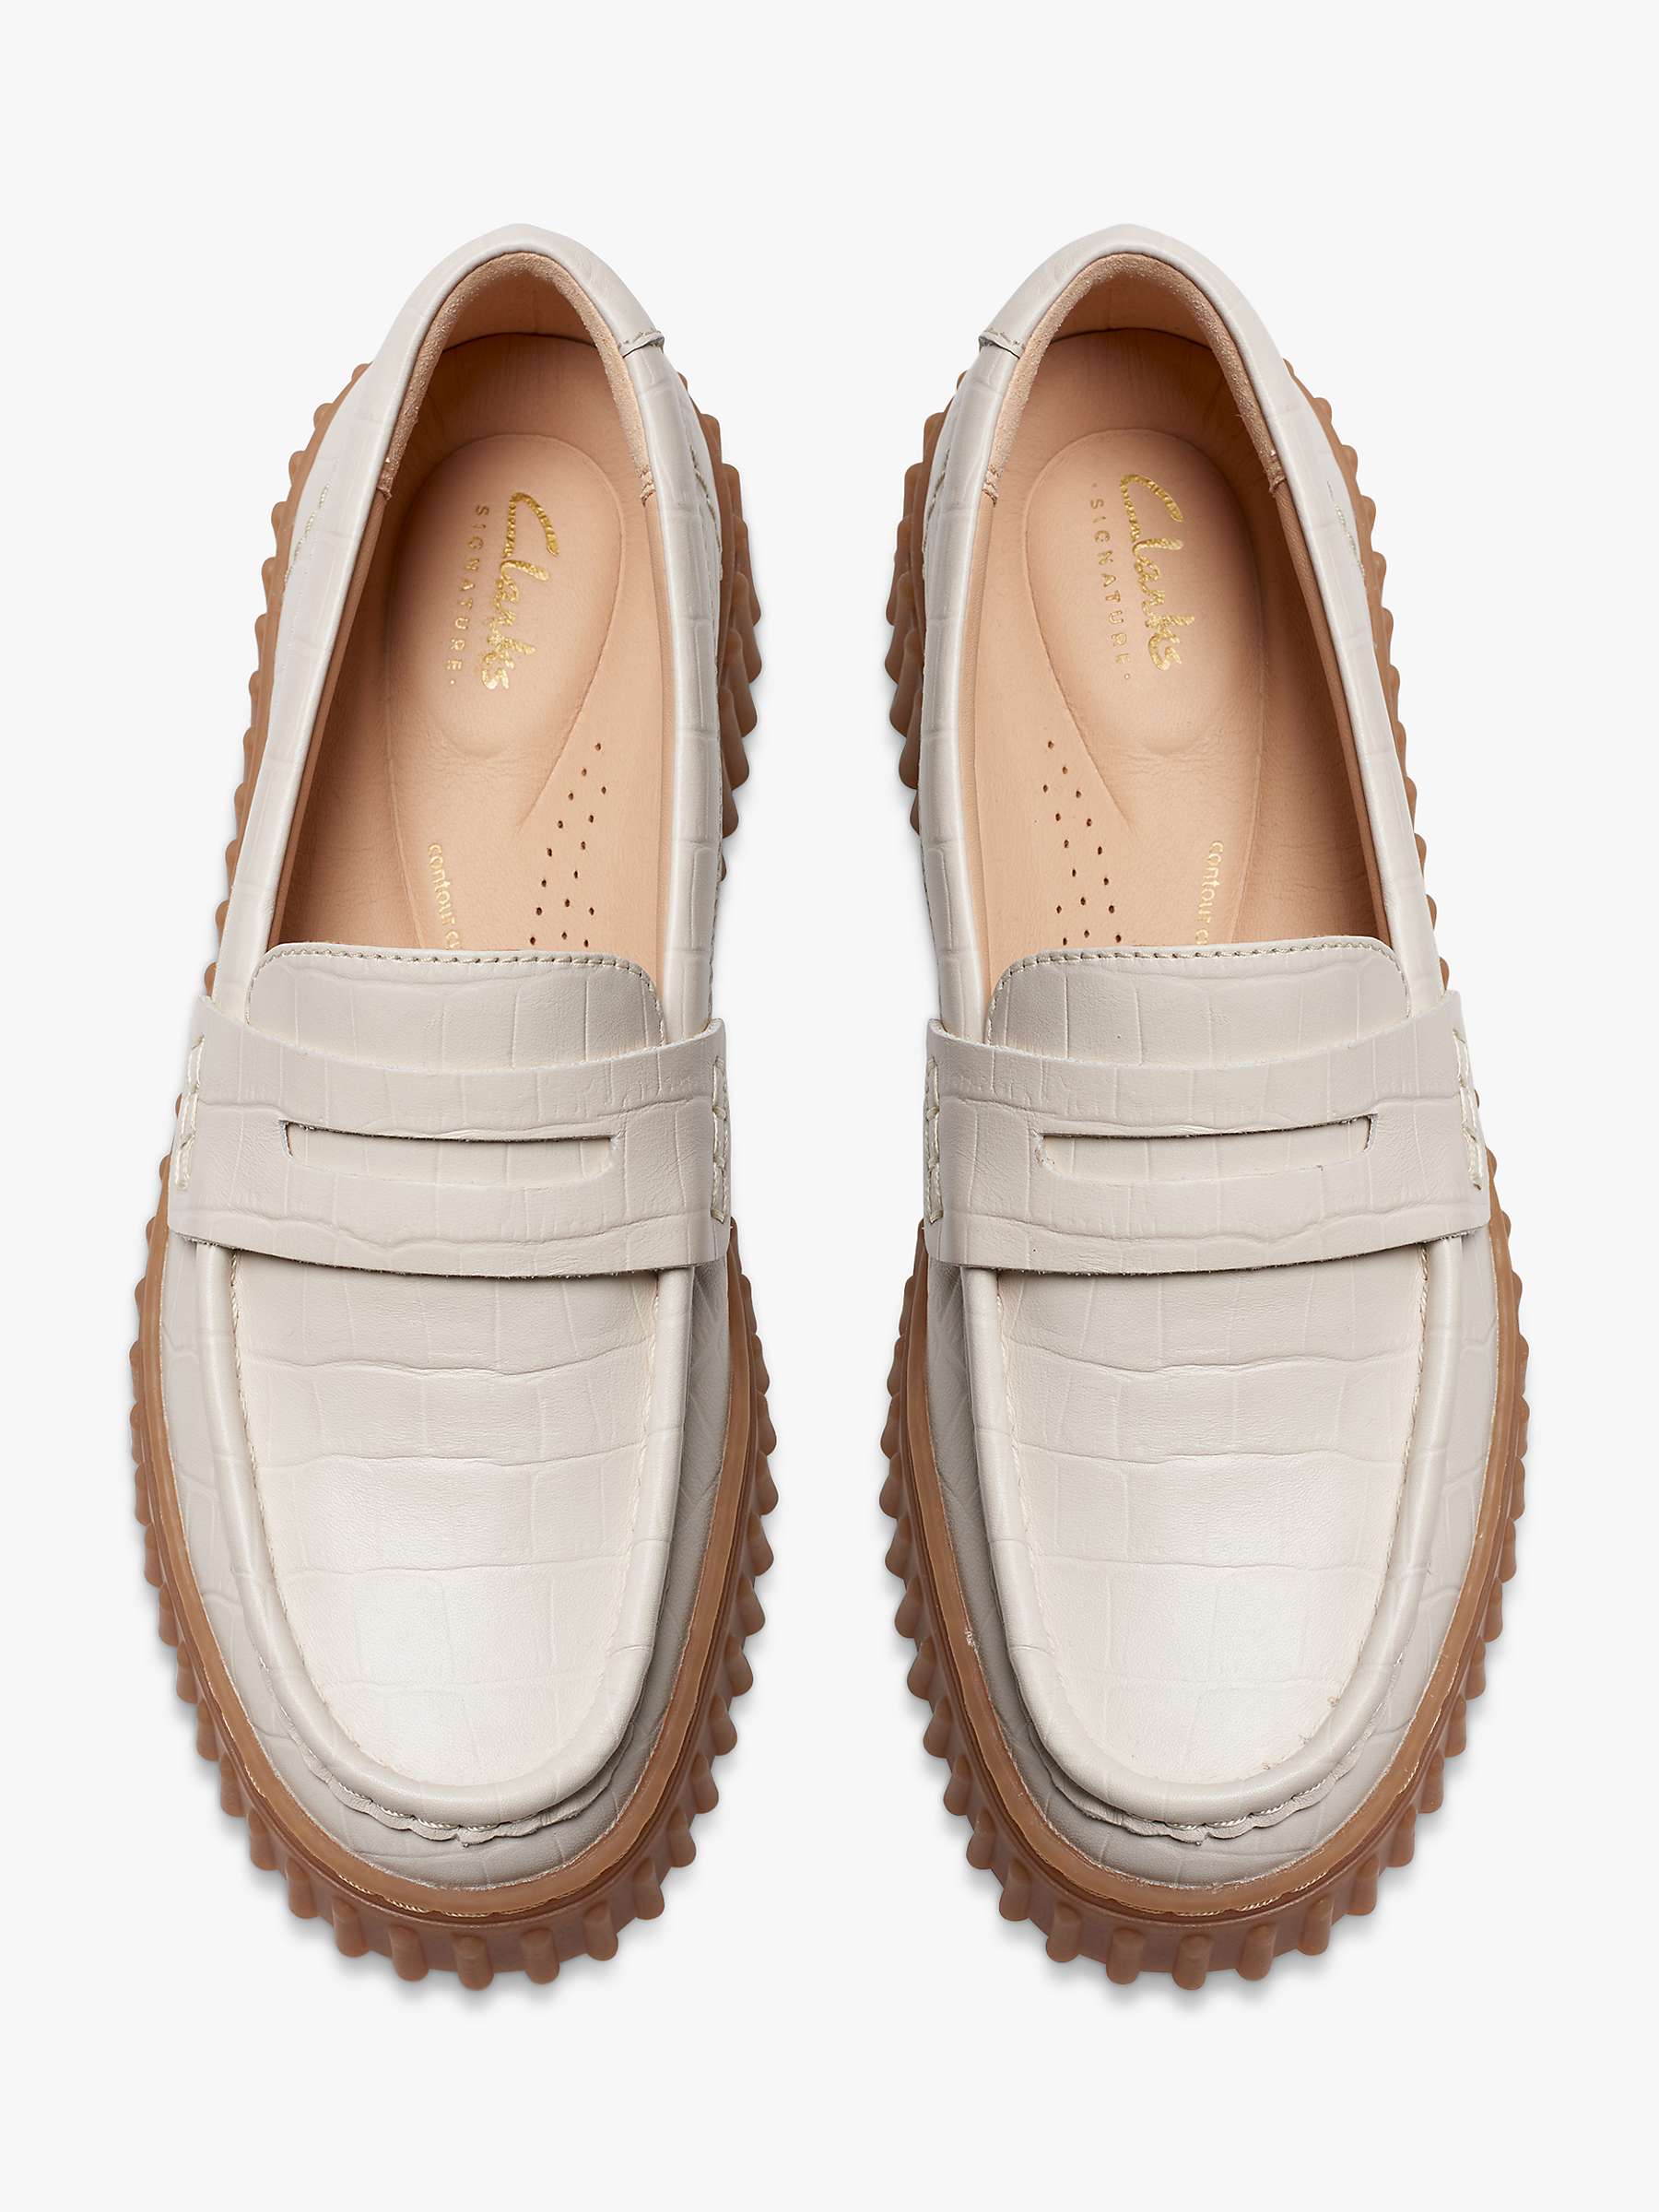 Buy Clarks Torhill Penny Croc Effect Leather Loafers, Cream Online at johnlewis.com